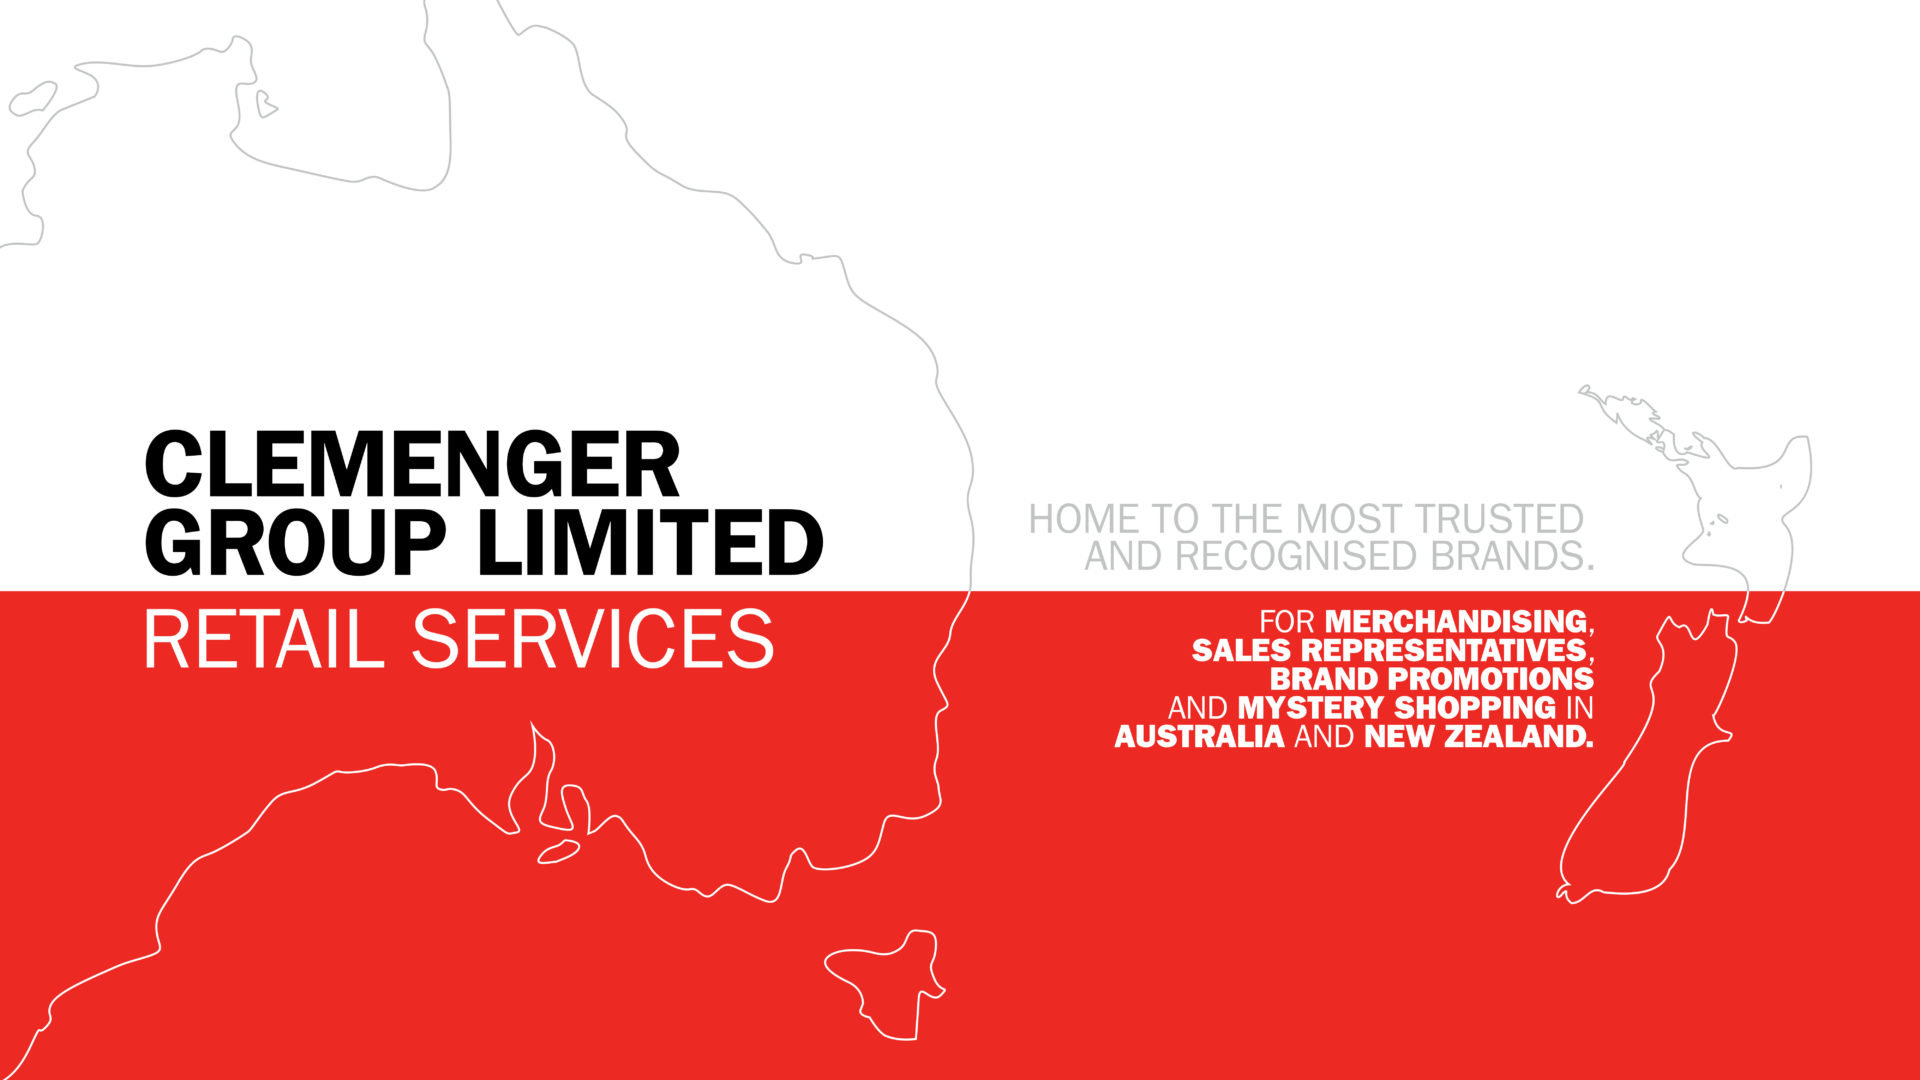 Clemenger Group Limited Retail Services: Home